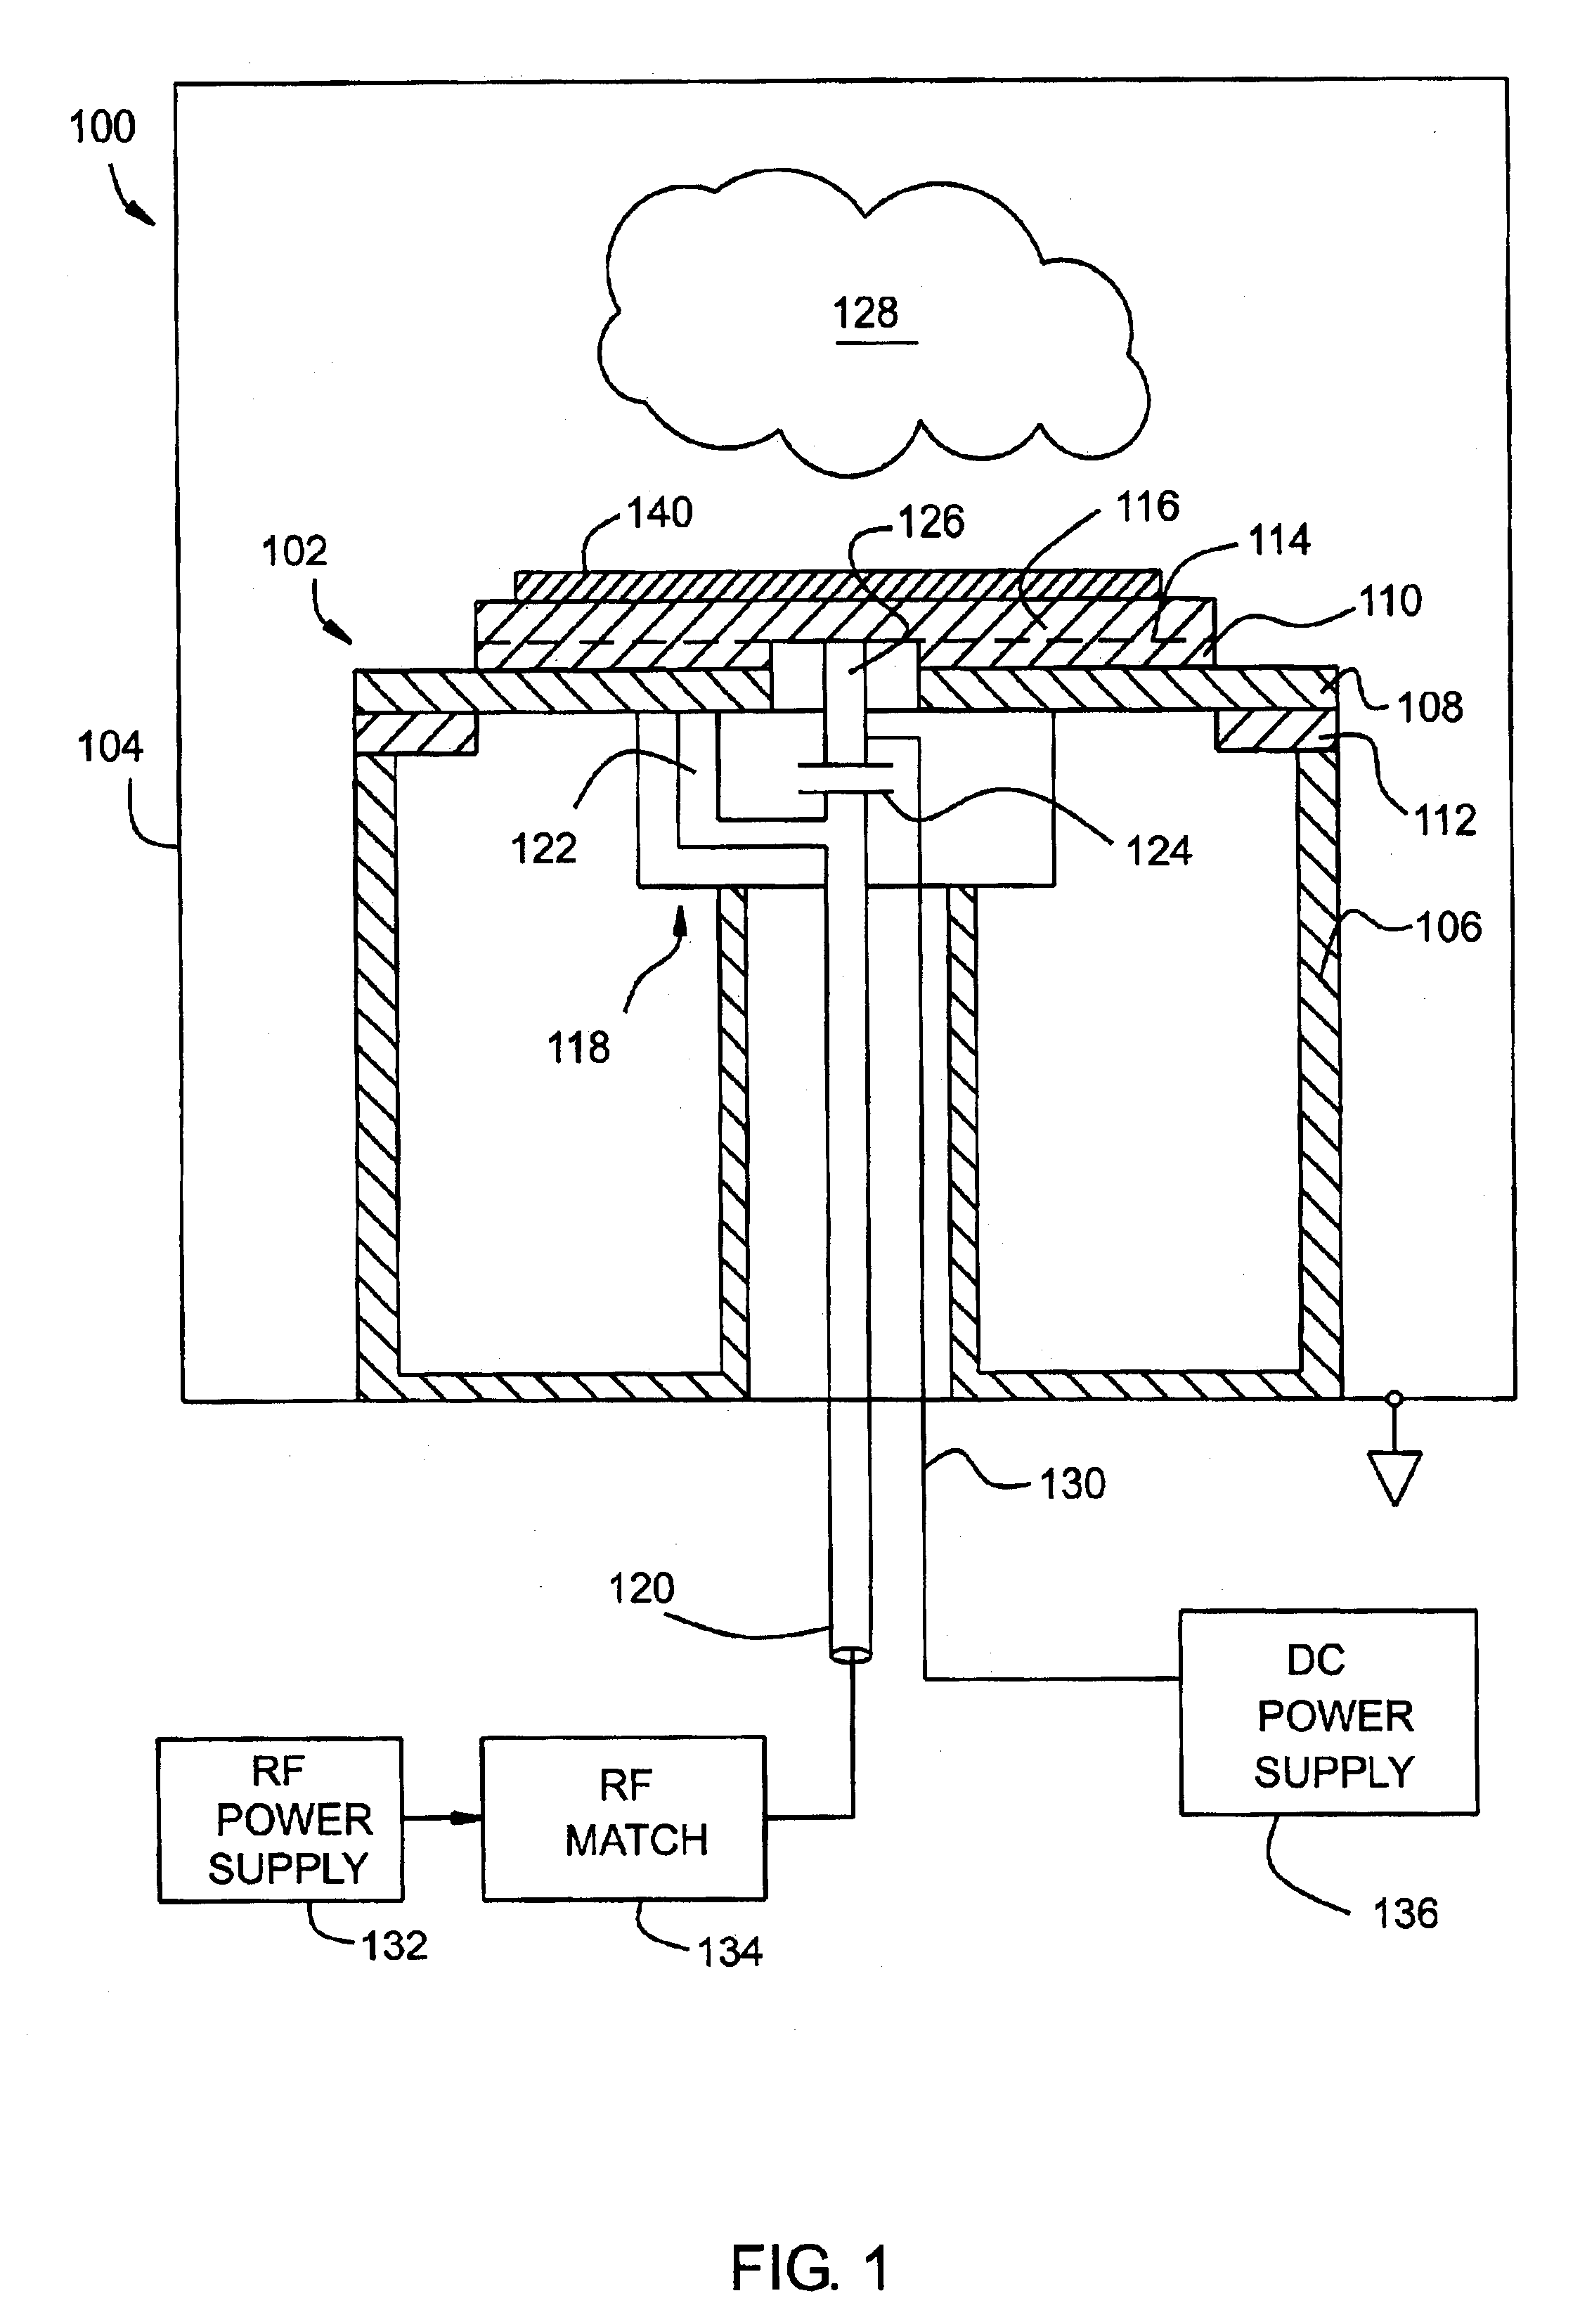 Method and apparatus for routing harmonics in a plasma to ground within a plasma enhanced semiconductor wafer processing chamber